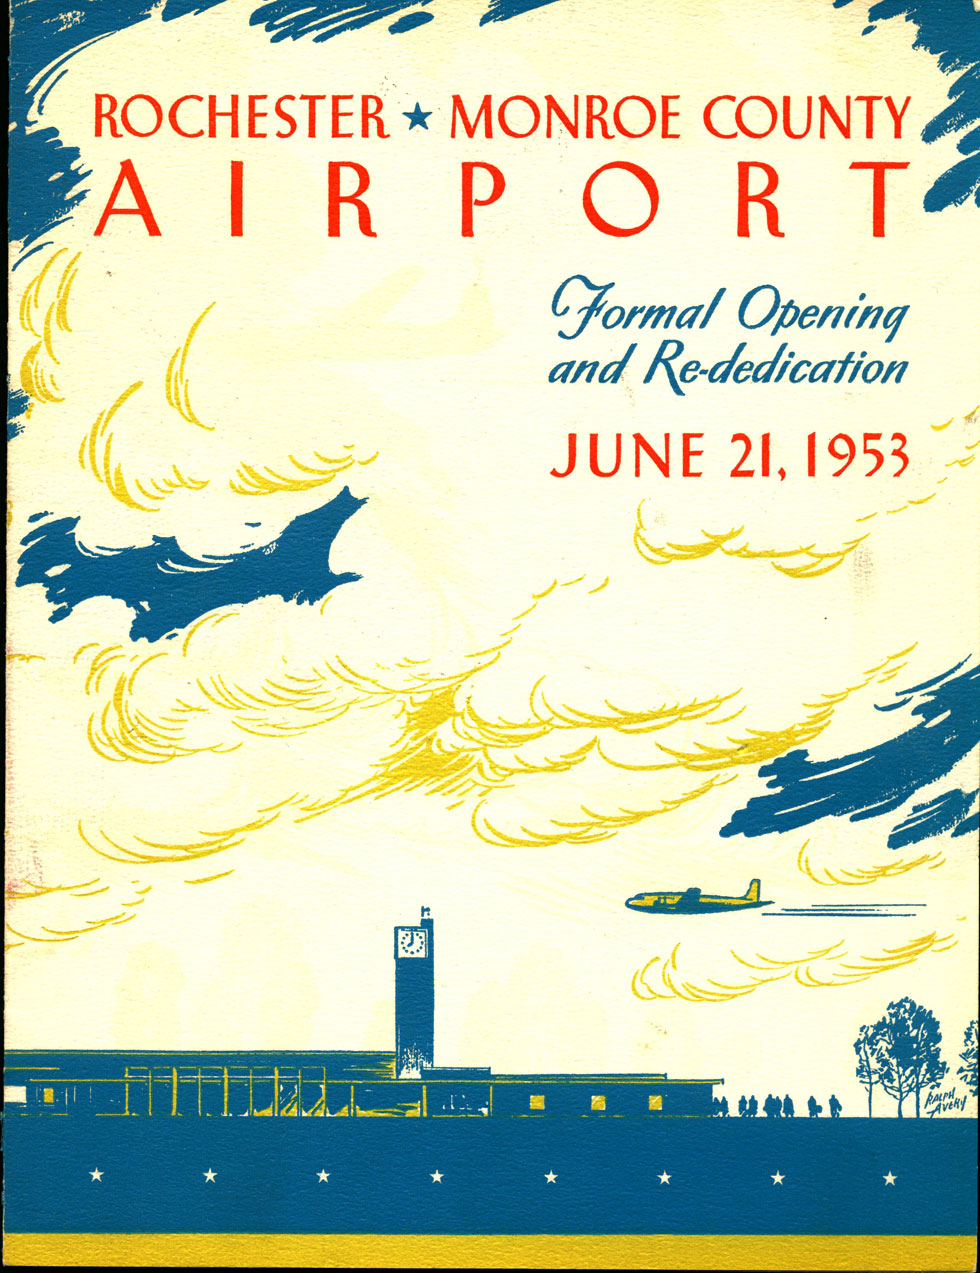 On June 21, 1953 the brand new terminal was dedicated. This brochure was given to guests in attendance at the ceremony. [IMAGE: Rochester Public Library Local History Division]